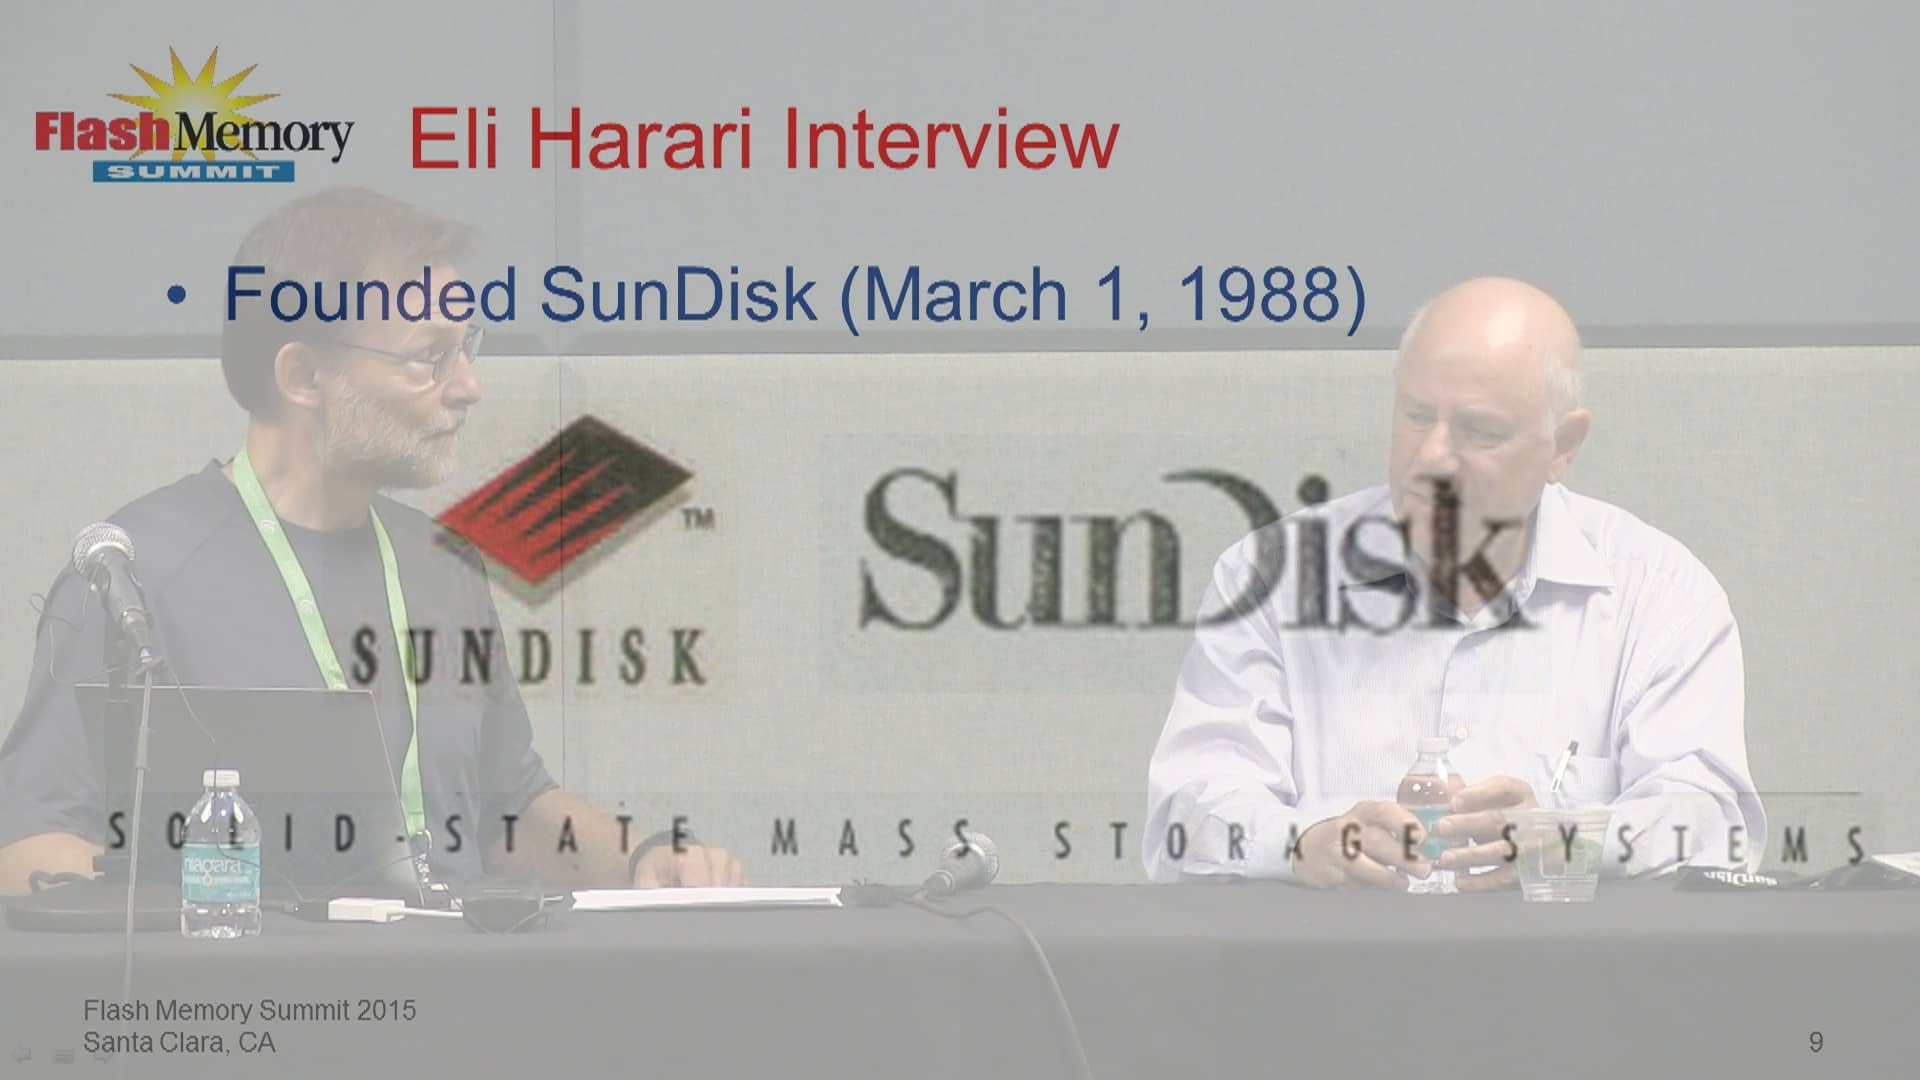 Eli Harari talks about the founding of SunDisk.